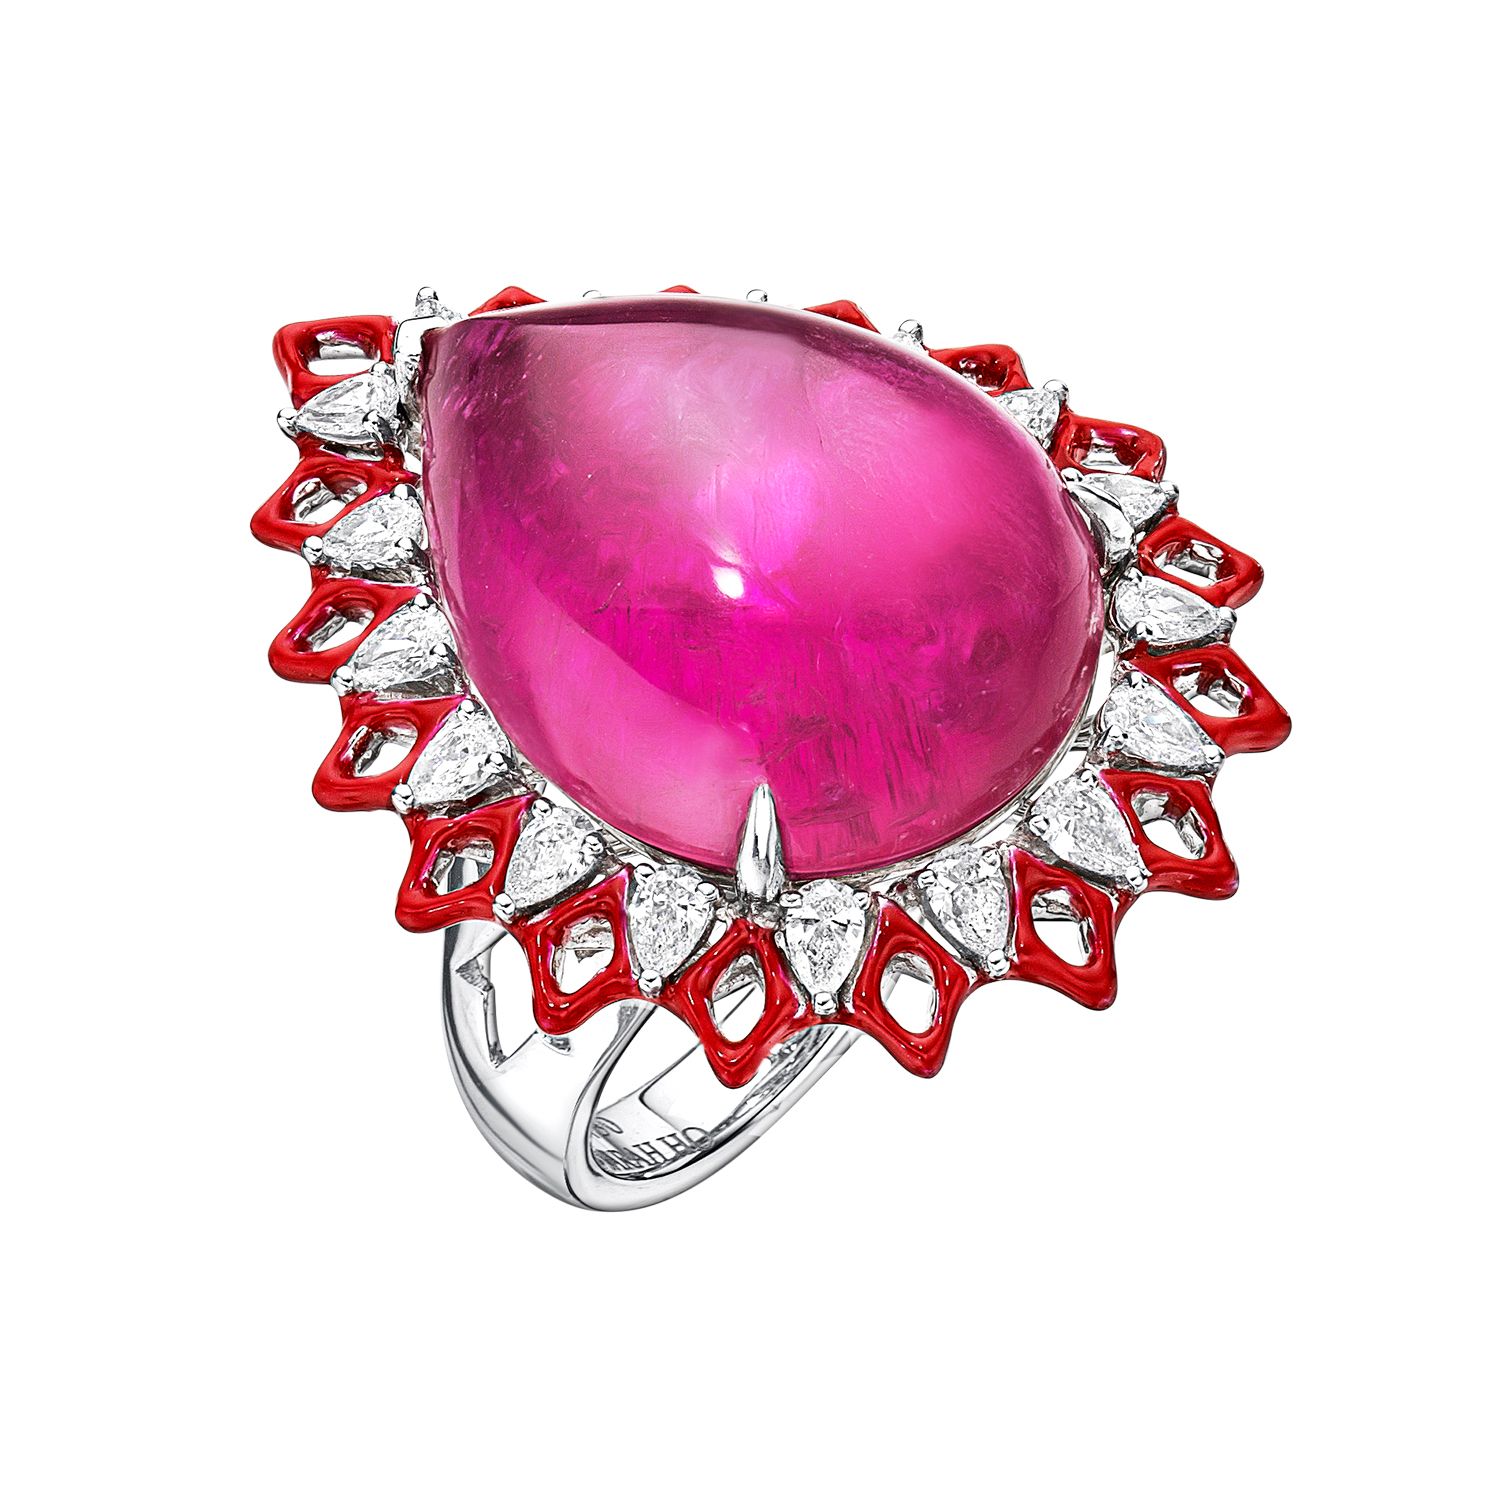 Jewellery, Gemstone, Ring, Ruby, Fashion accessory, Body jewelry, Pink, Magenta, Engagement ring, Silver, 